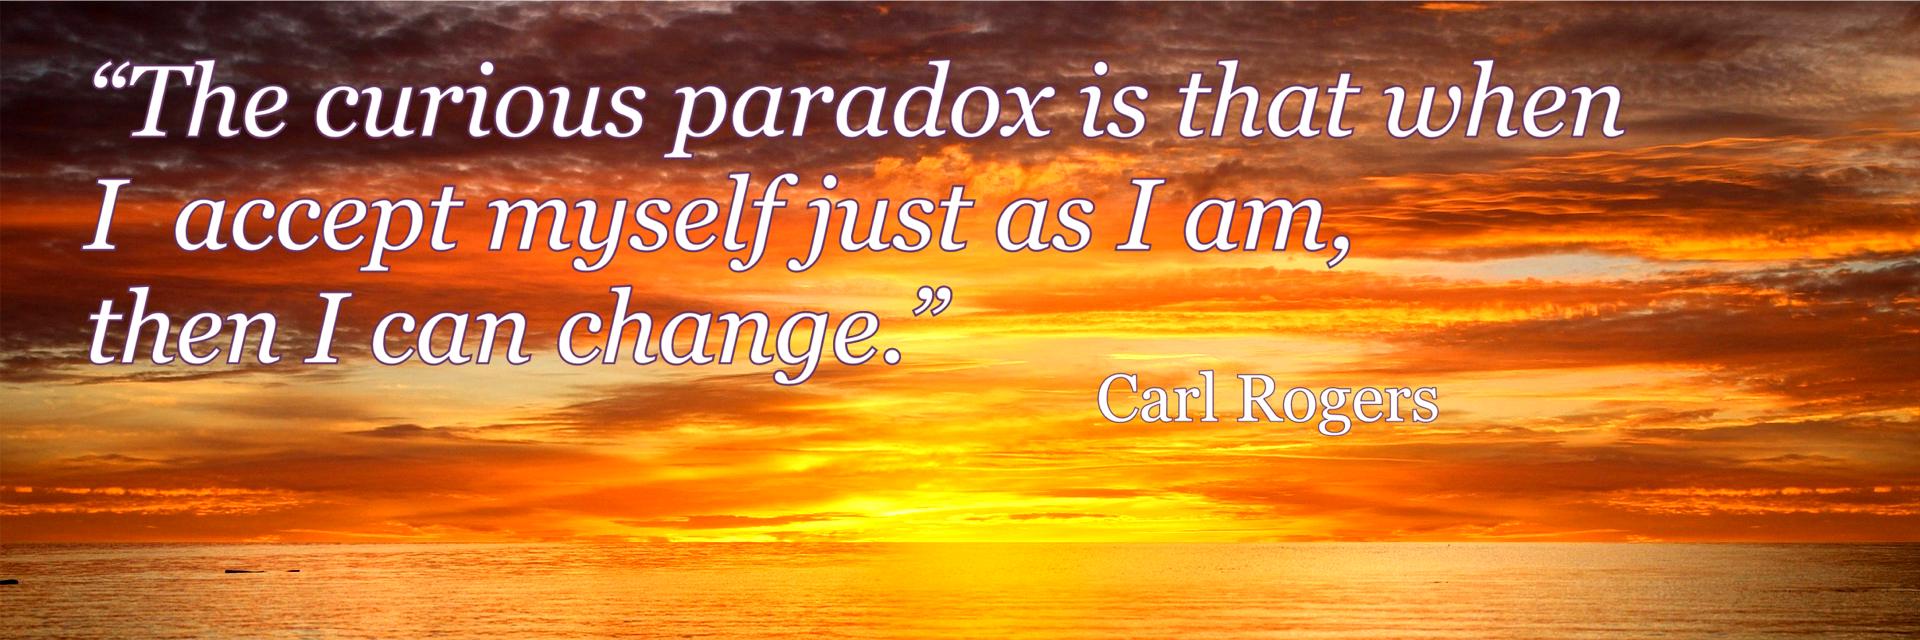 “The curious paradox is that when I  accept myself just as I am,  then I can change.” -  Carl Rogers.  DML Counselling & Psychotherapy, County Wexford, Ireland